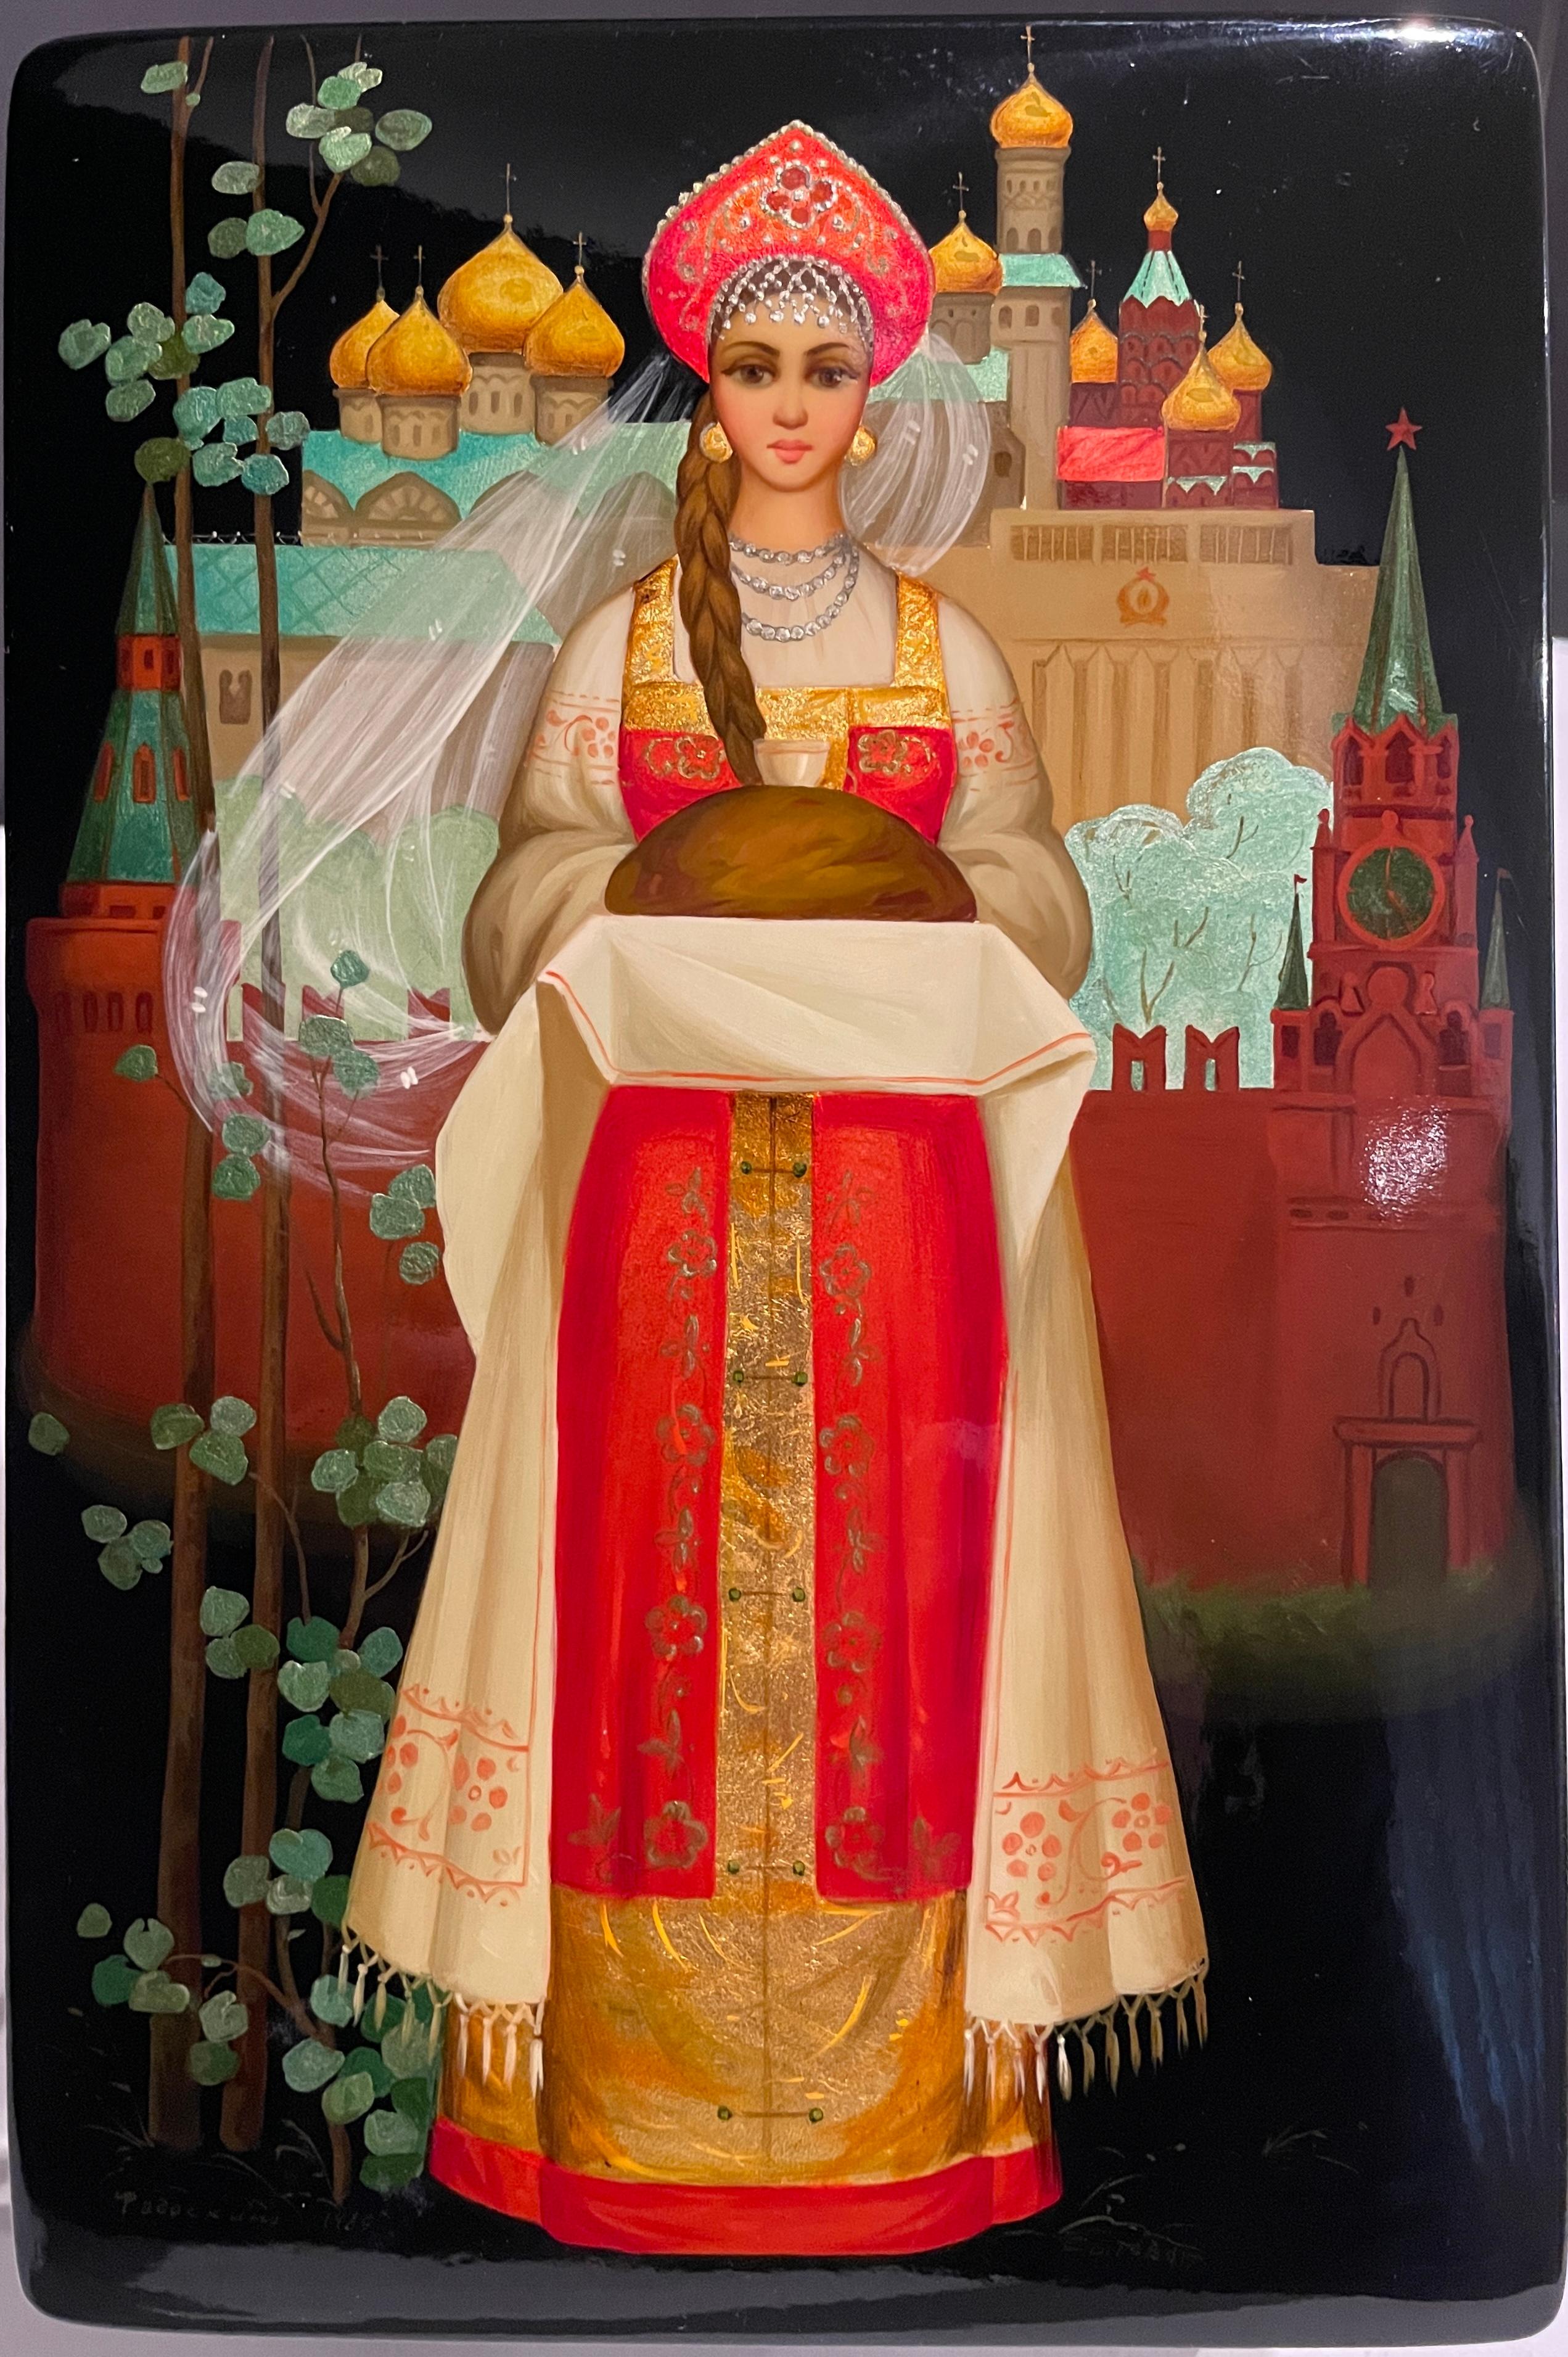 This exquisite Russian Fedoskino black lacquered papier-mache box. Young woman in traditional attire. The historic village of Fedoskino is famous for its production of decorative lacquer boxes, dating back to the late 18th century. Markings include